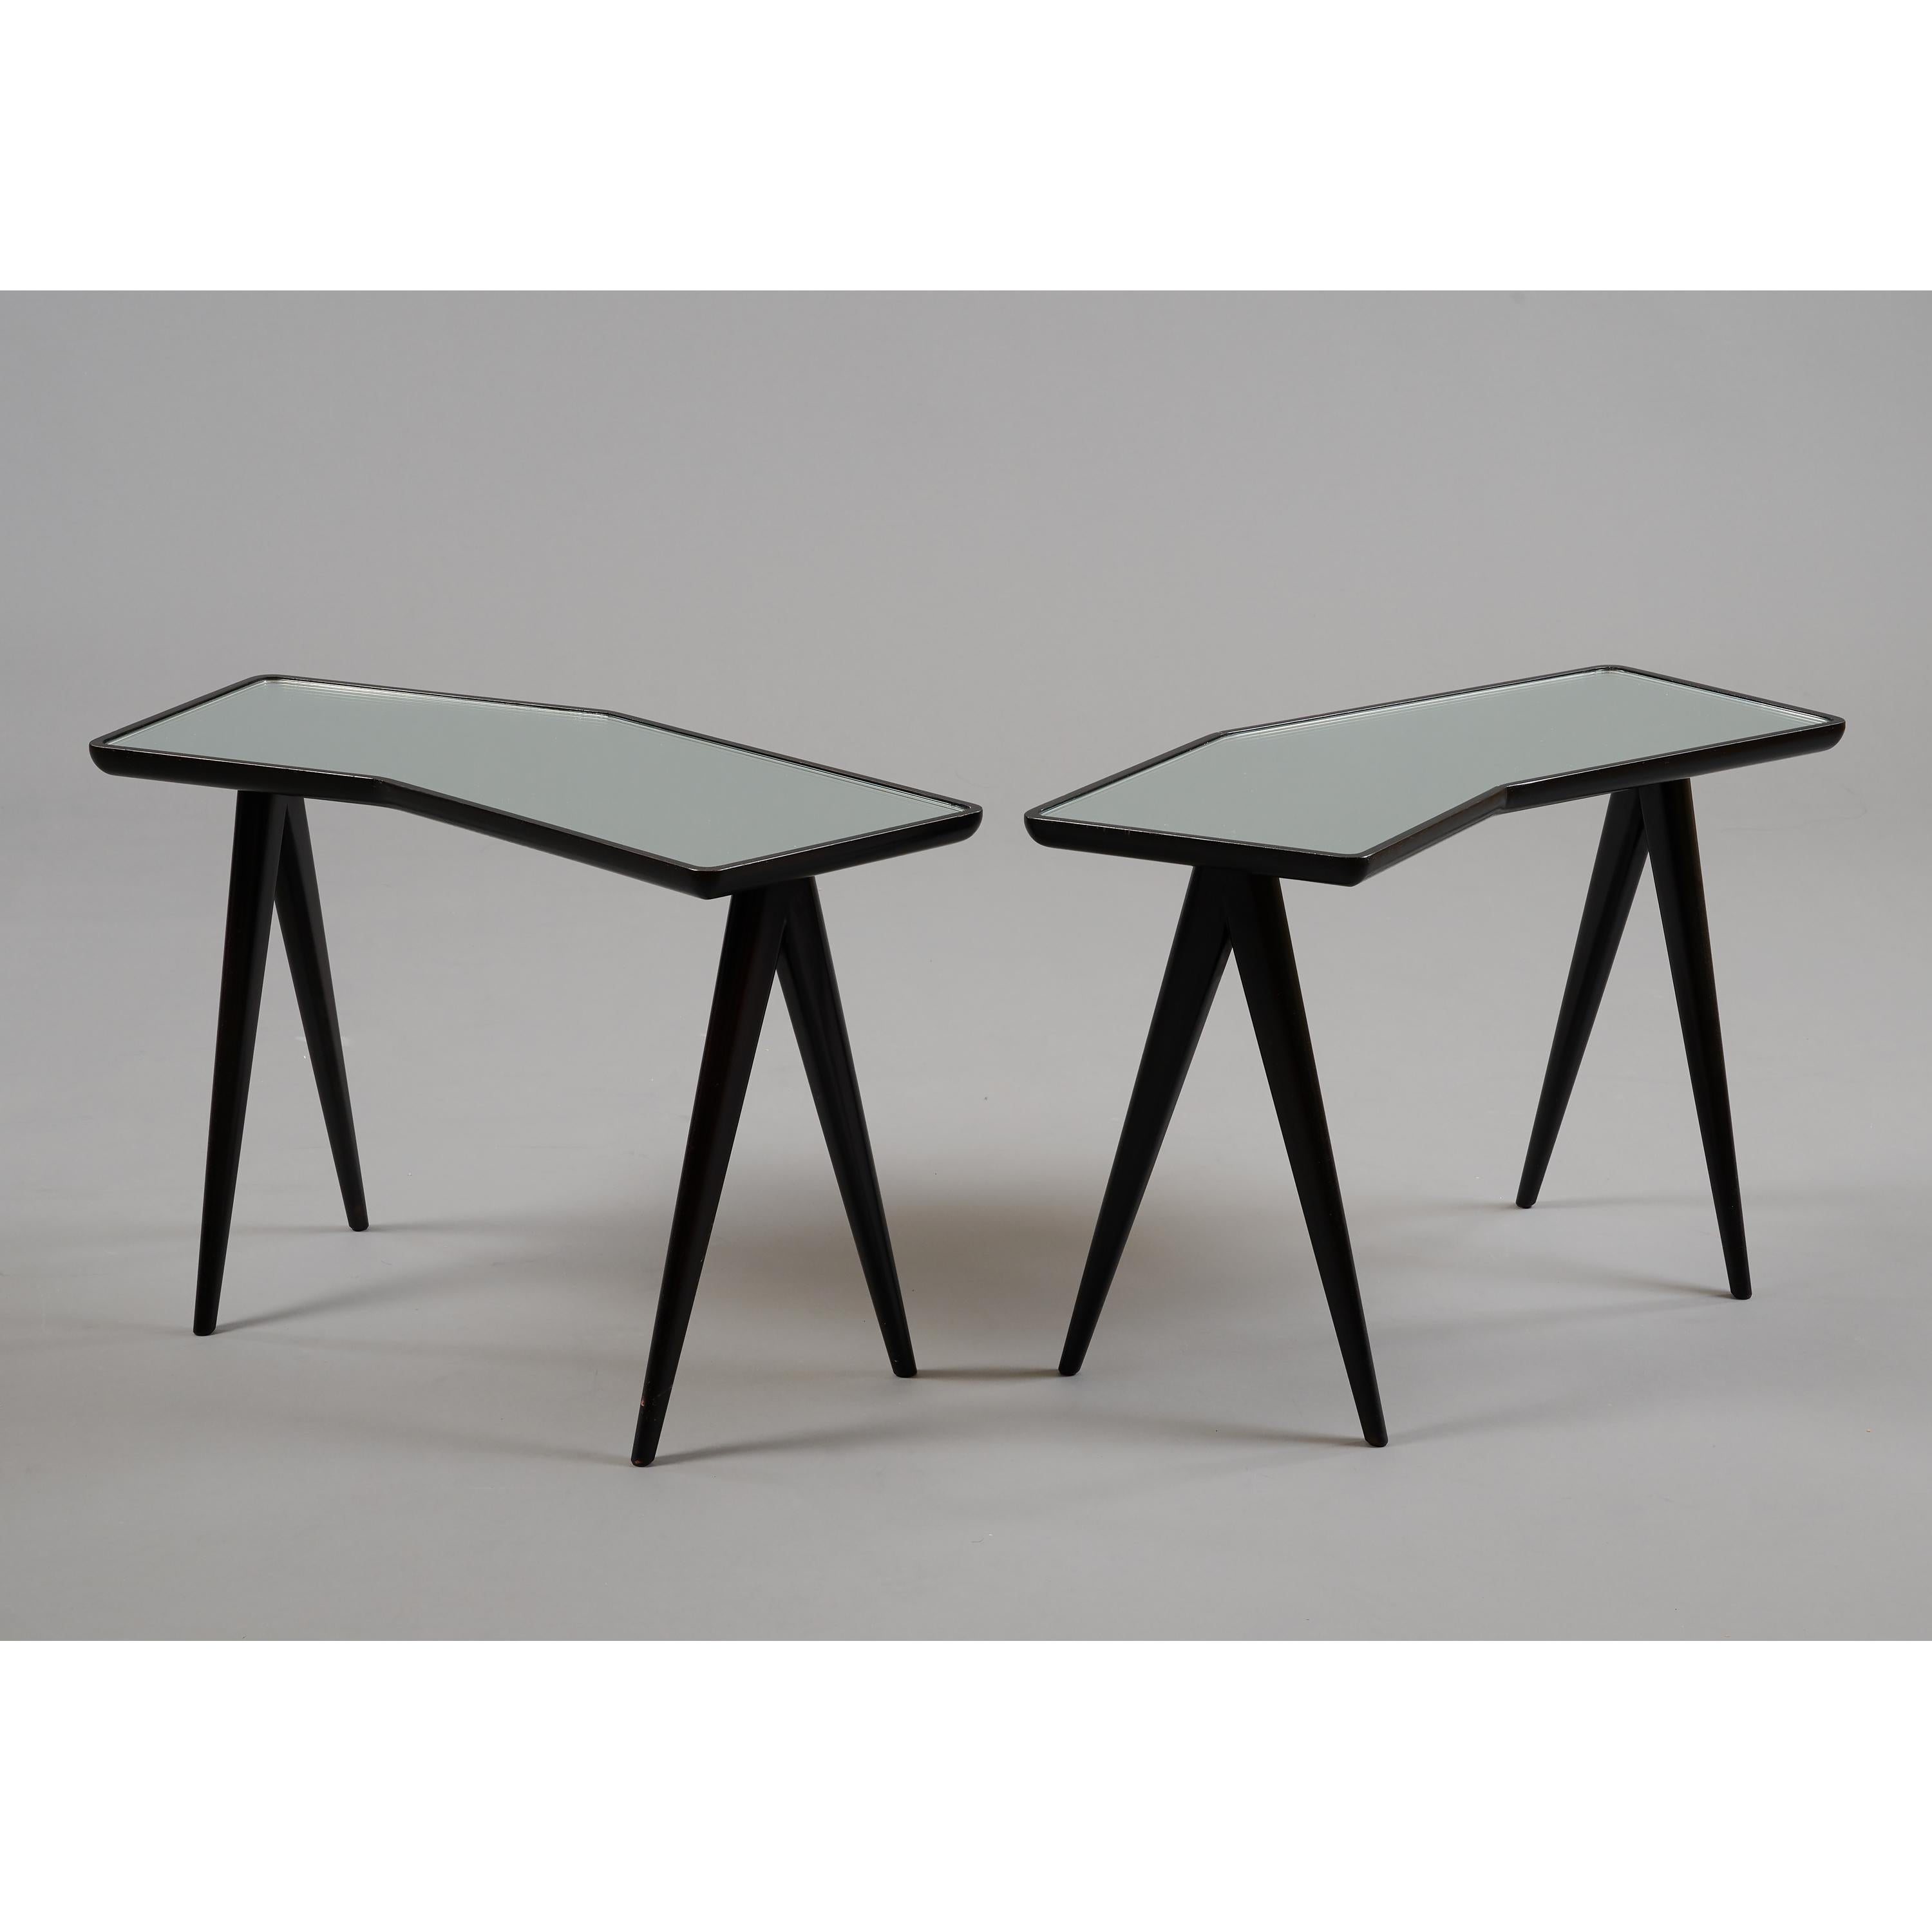 Mid-Century Modern Gio Ponti Pair of Geometric Nesting Tables with Mirrored Tops, Italy, 1950's For Sale